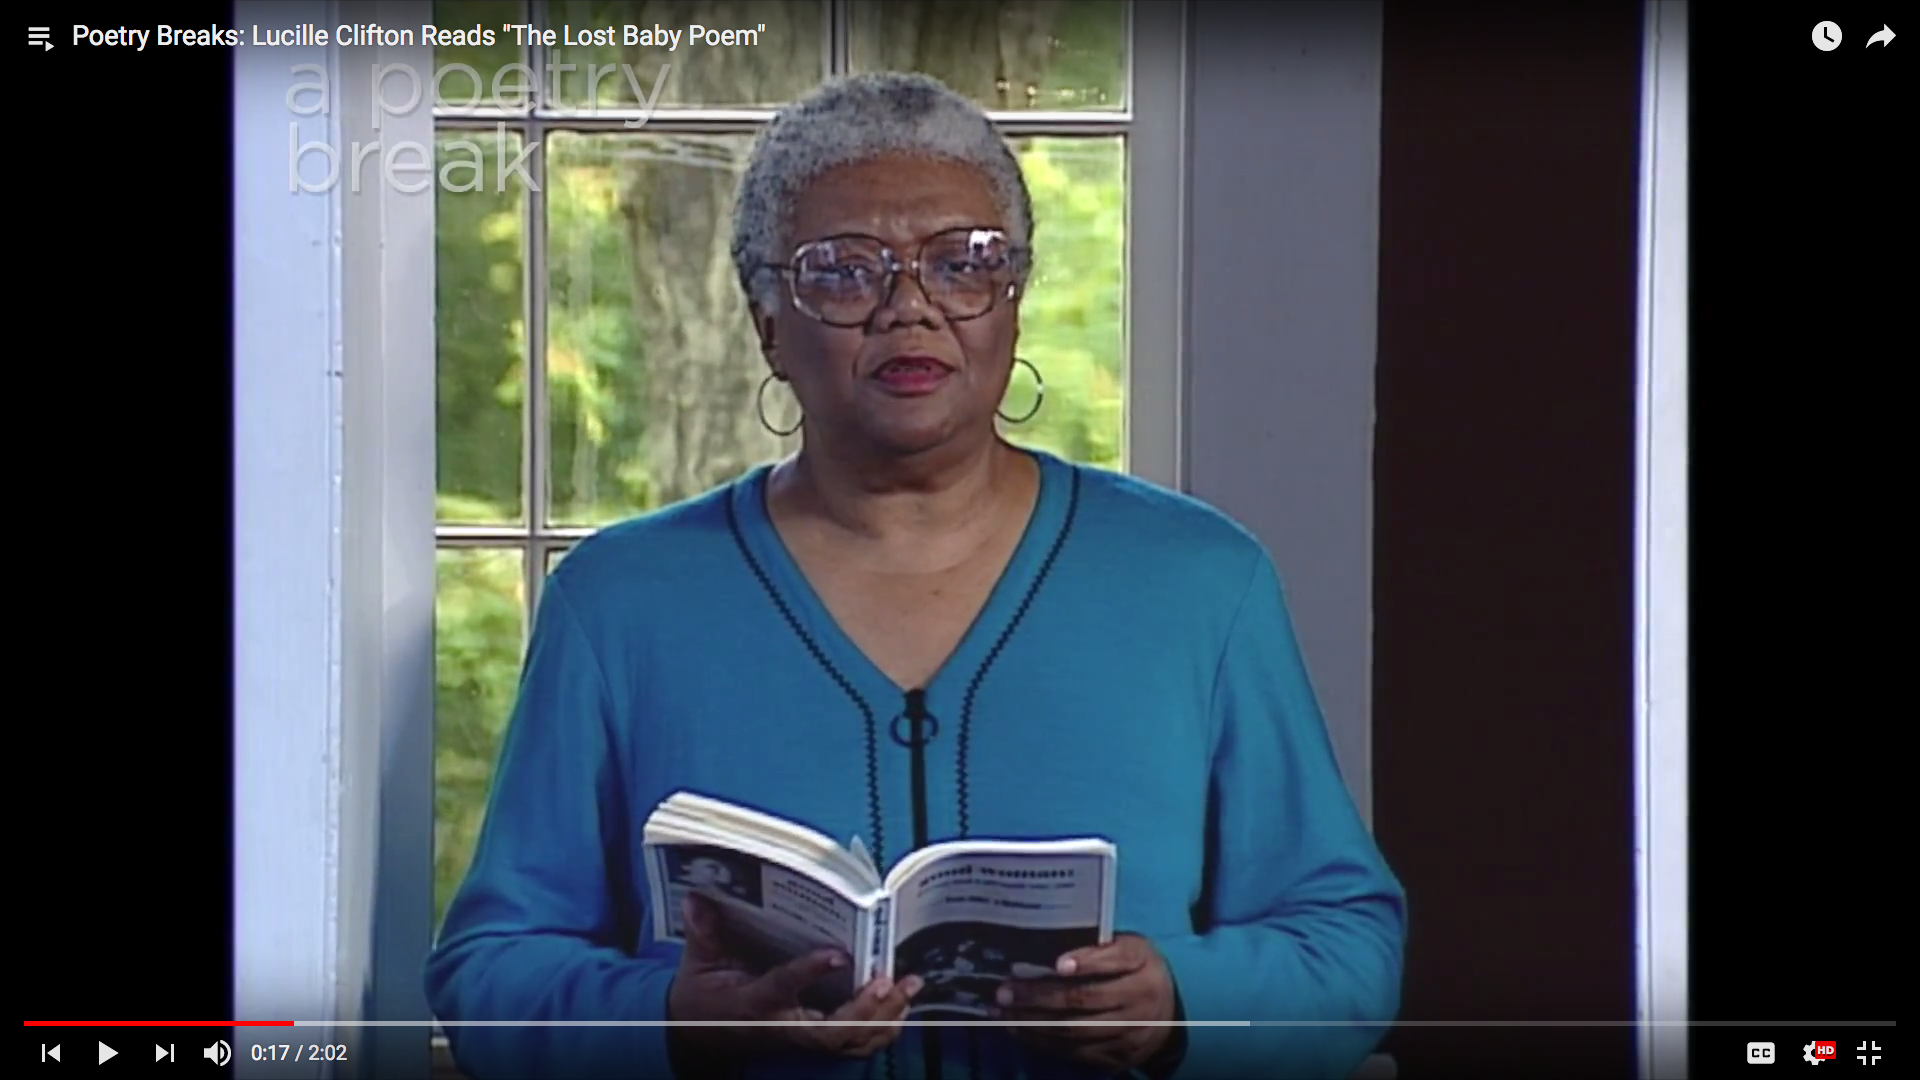 Lucille Clifton Reads "The Lost Baby Poem"